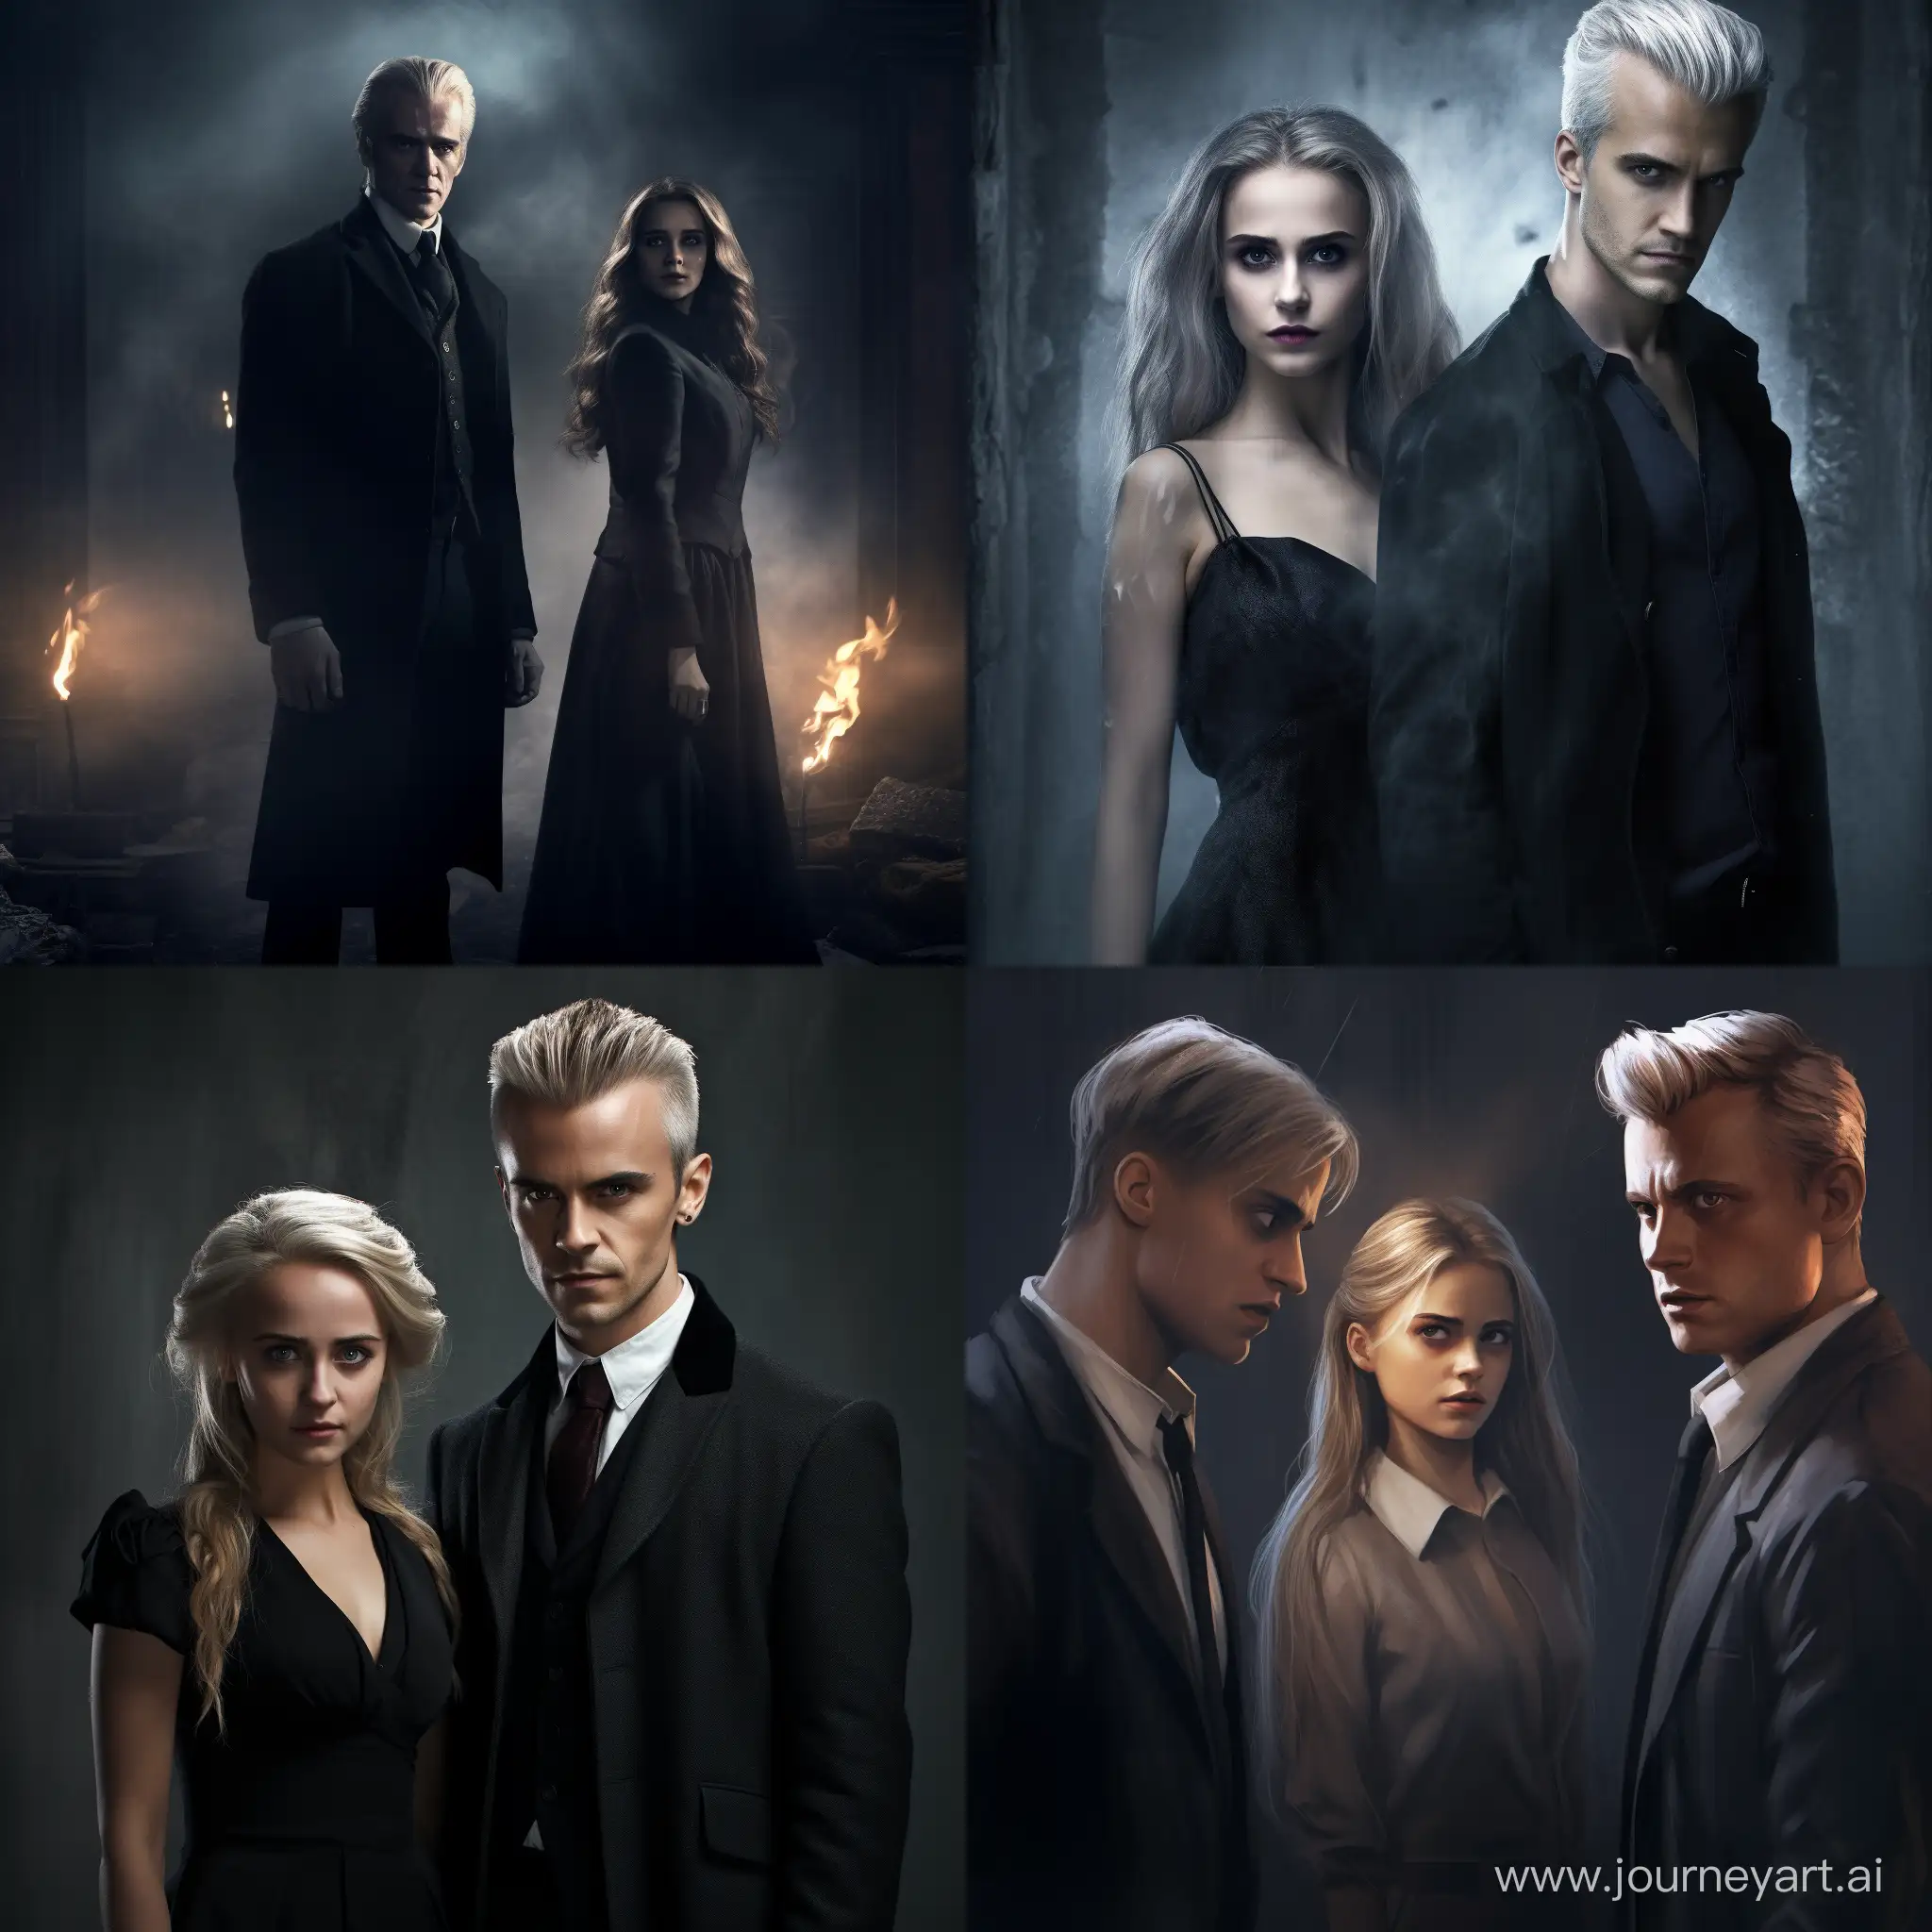 Hermione-Granger-Confronts-Draco-Malfoy-with-Fiery-Anger